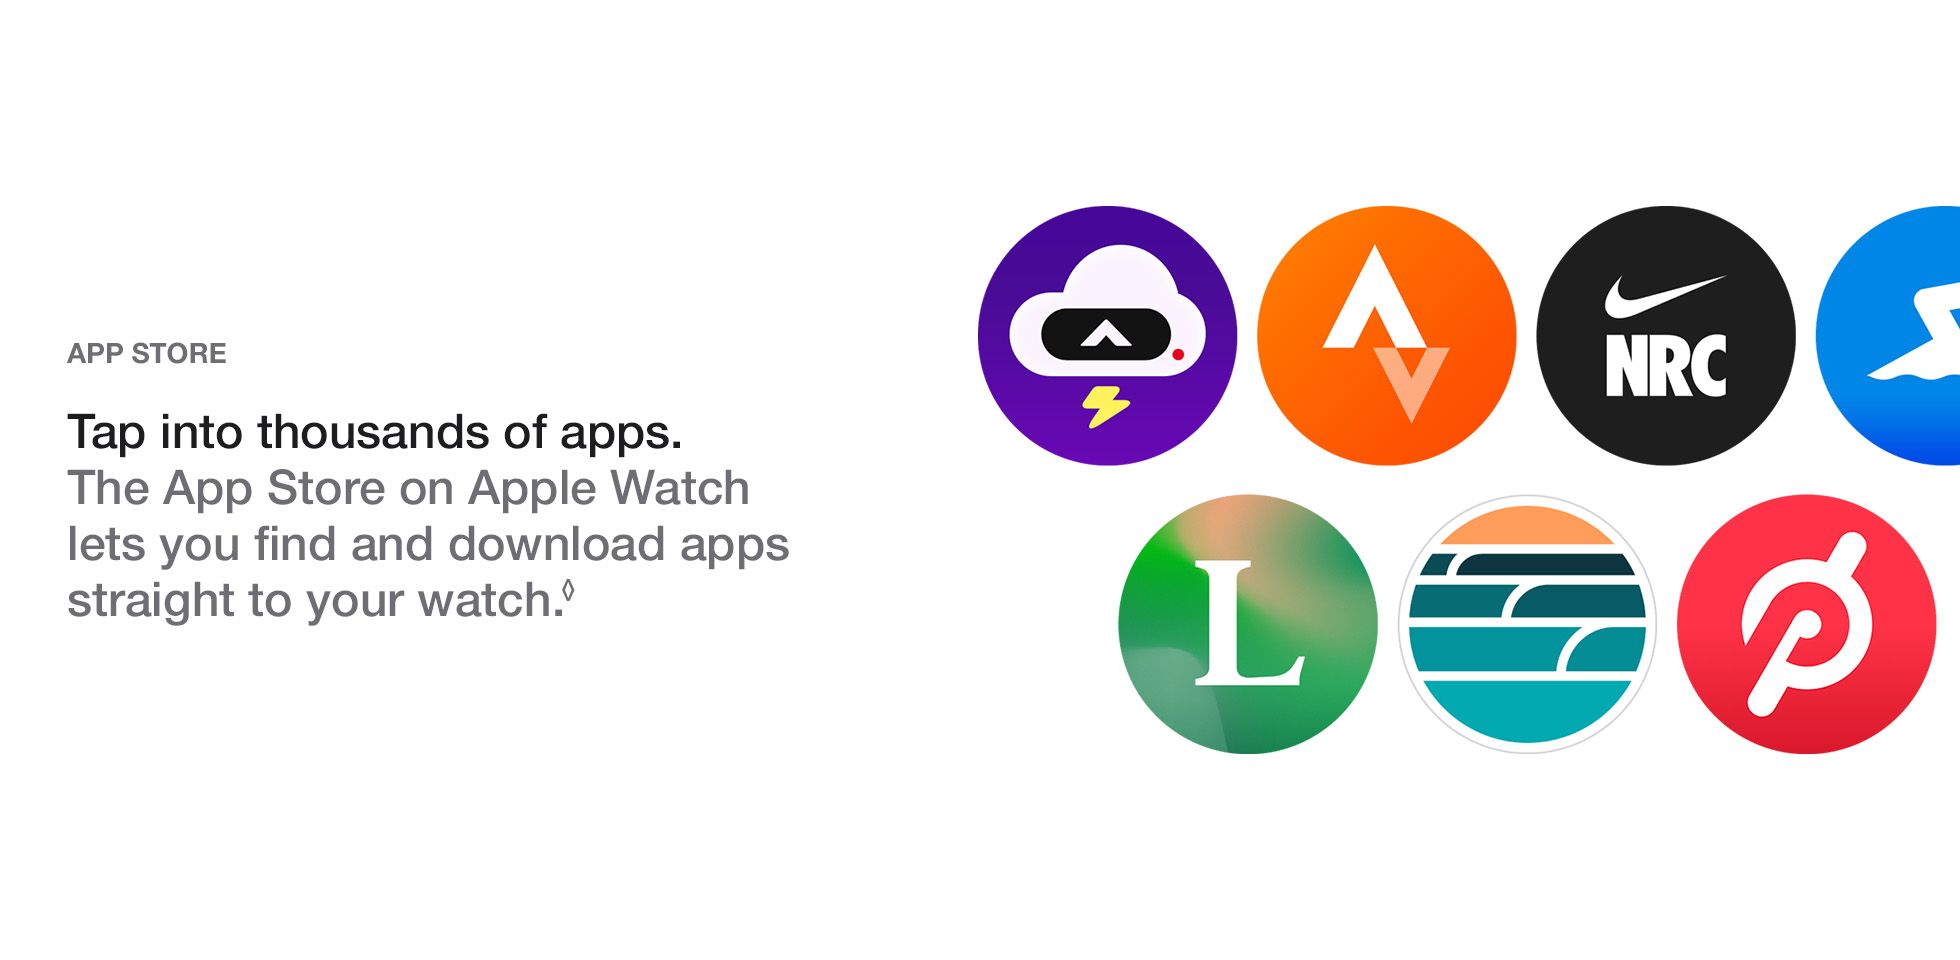 apple watch apps. Tap into thousands of apps. The App Store on Apple Watch lets you find and download apps straight to your watch.